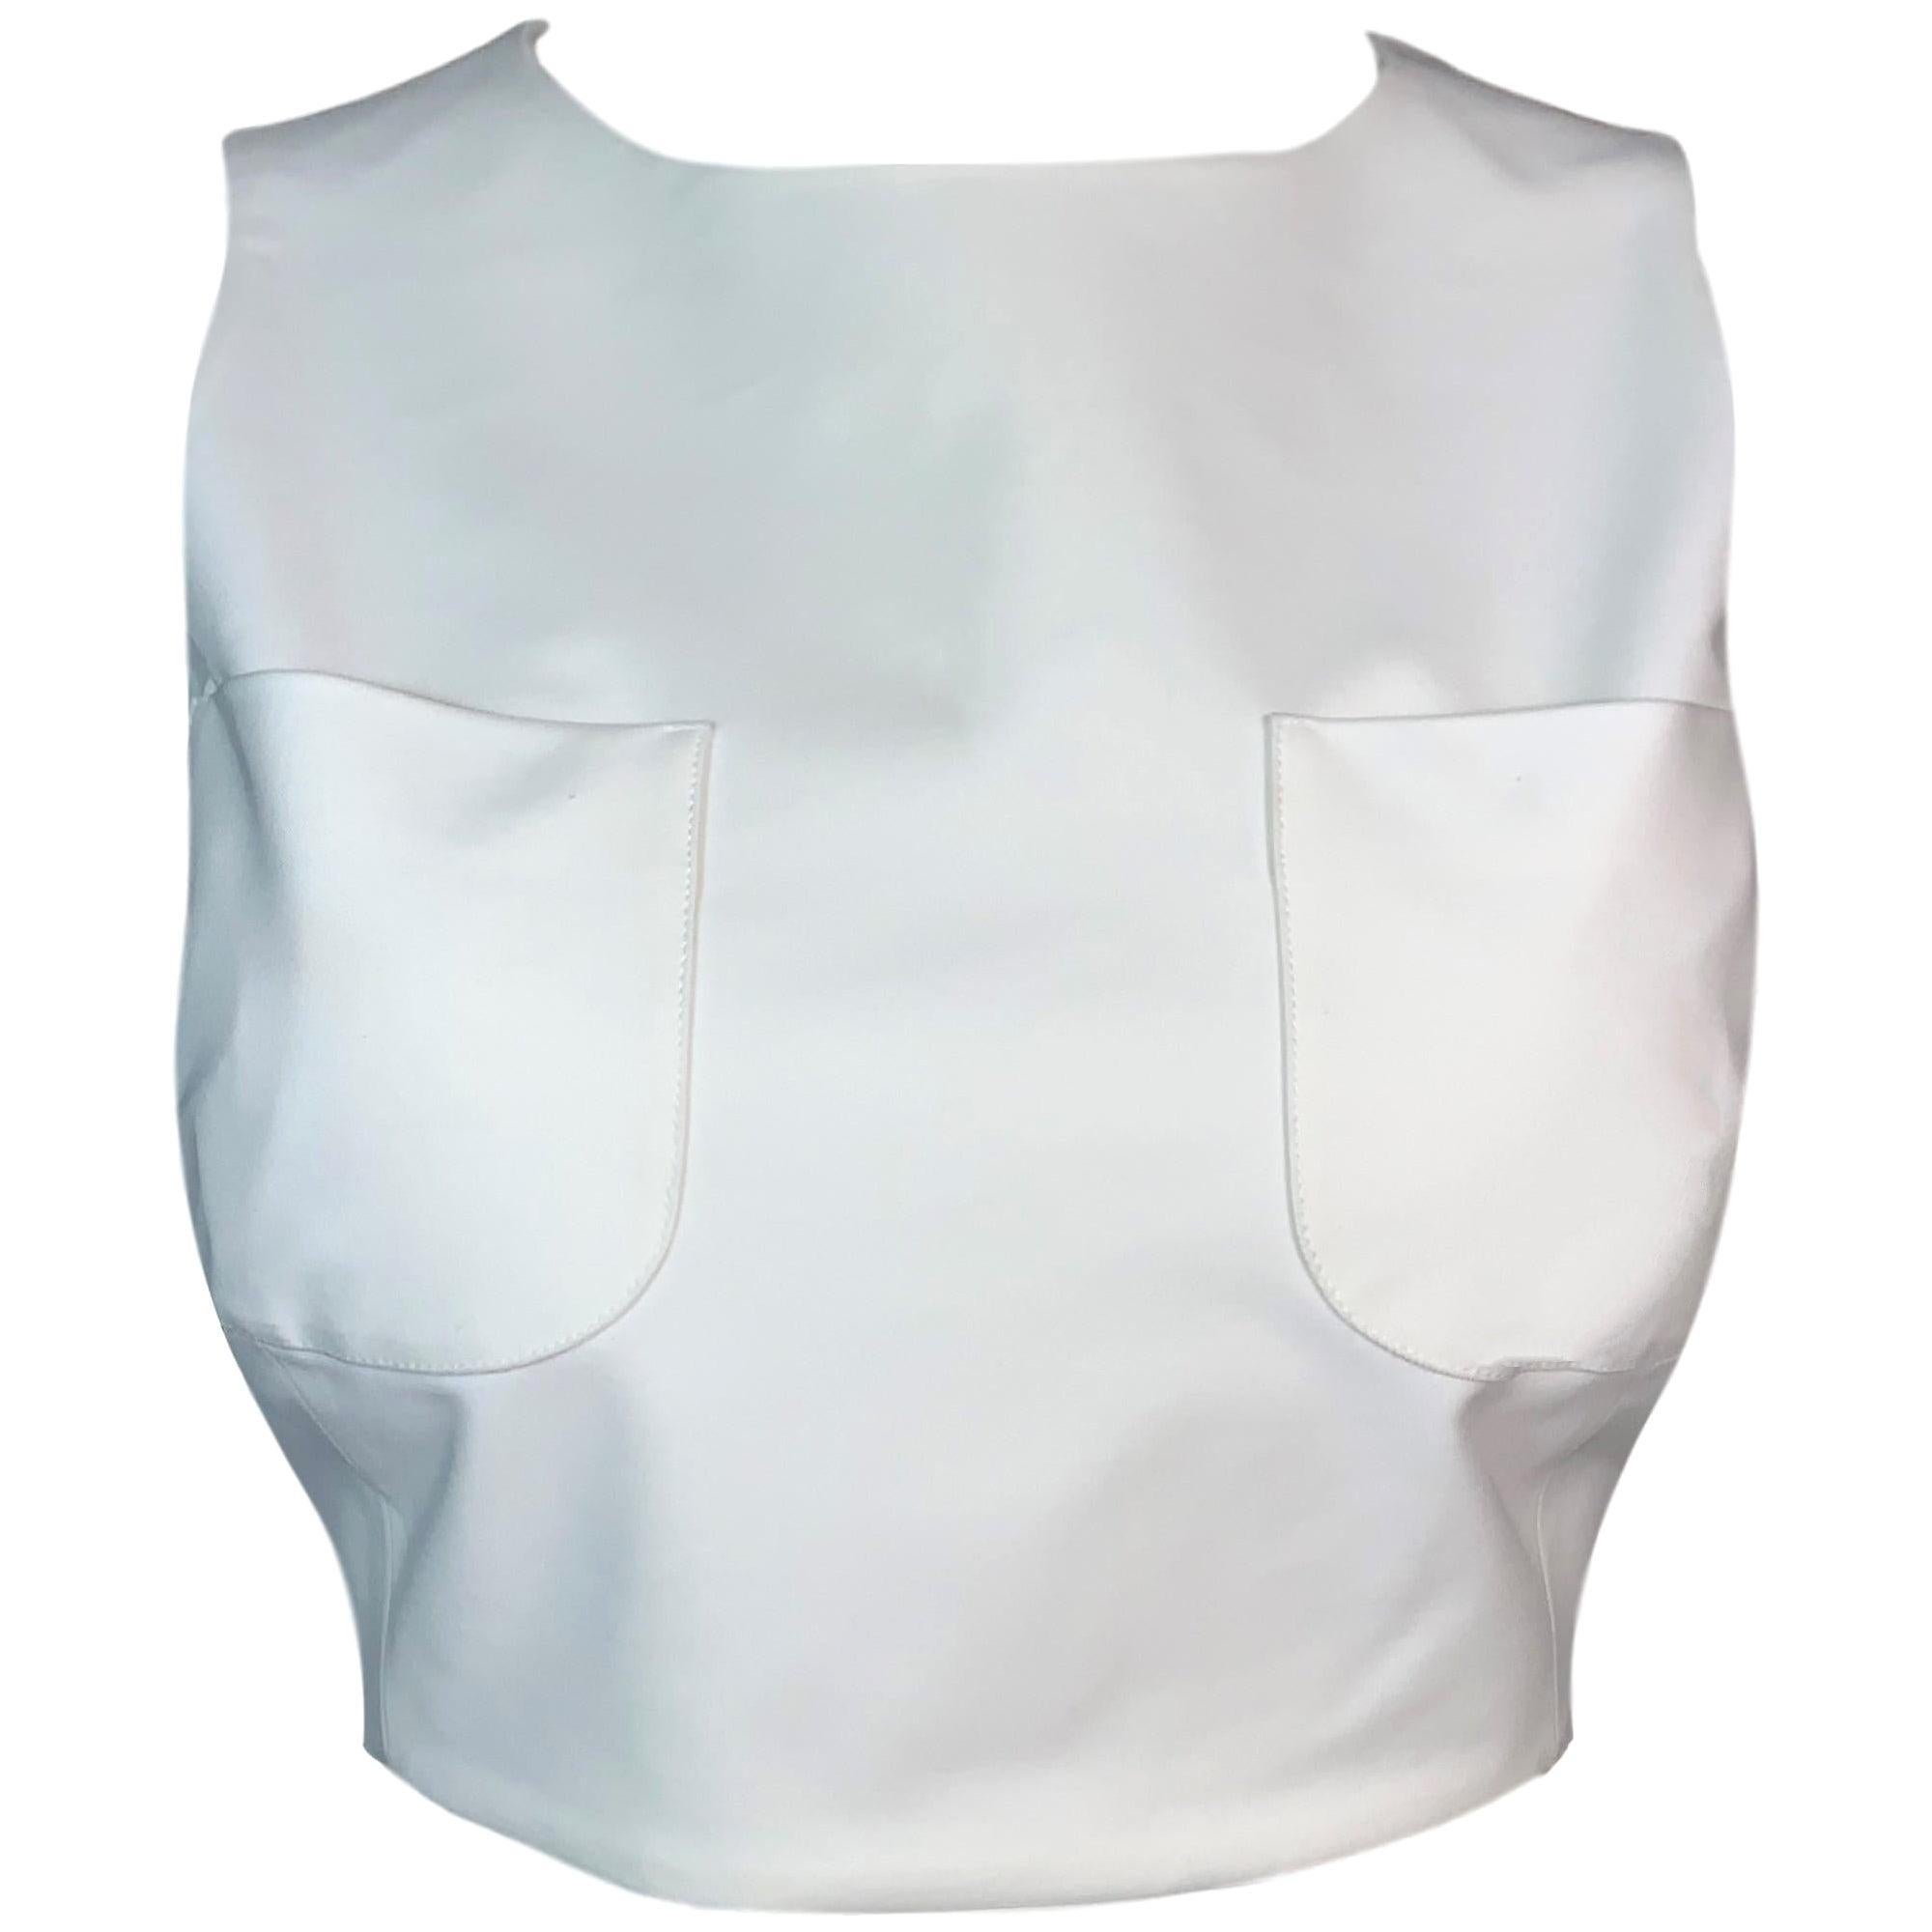 S/S 1996 Gucci by Tom Ford 60's MOD Style White Crop Top